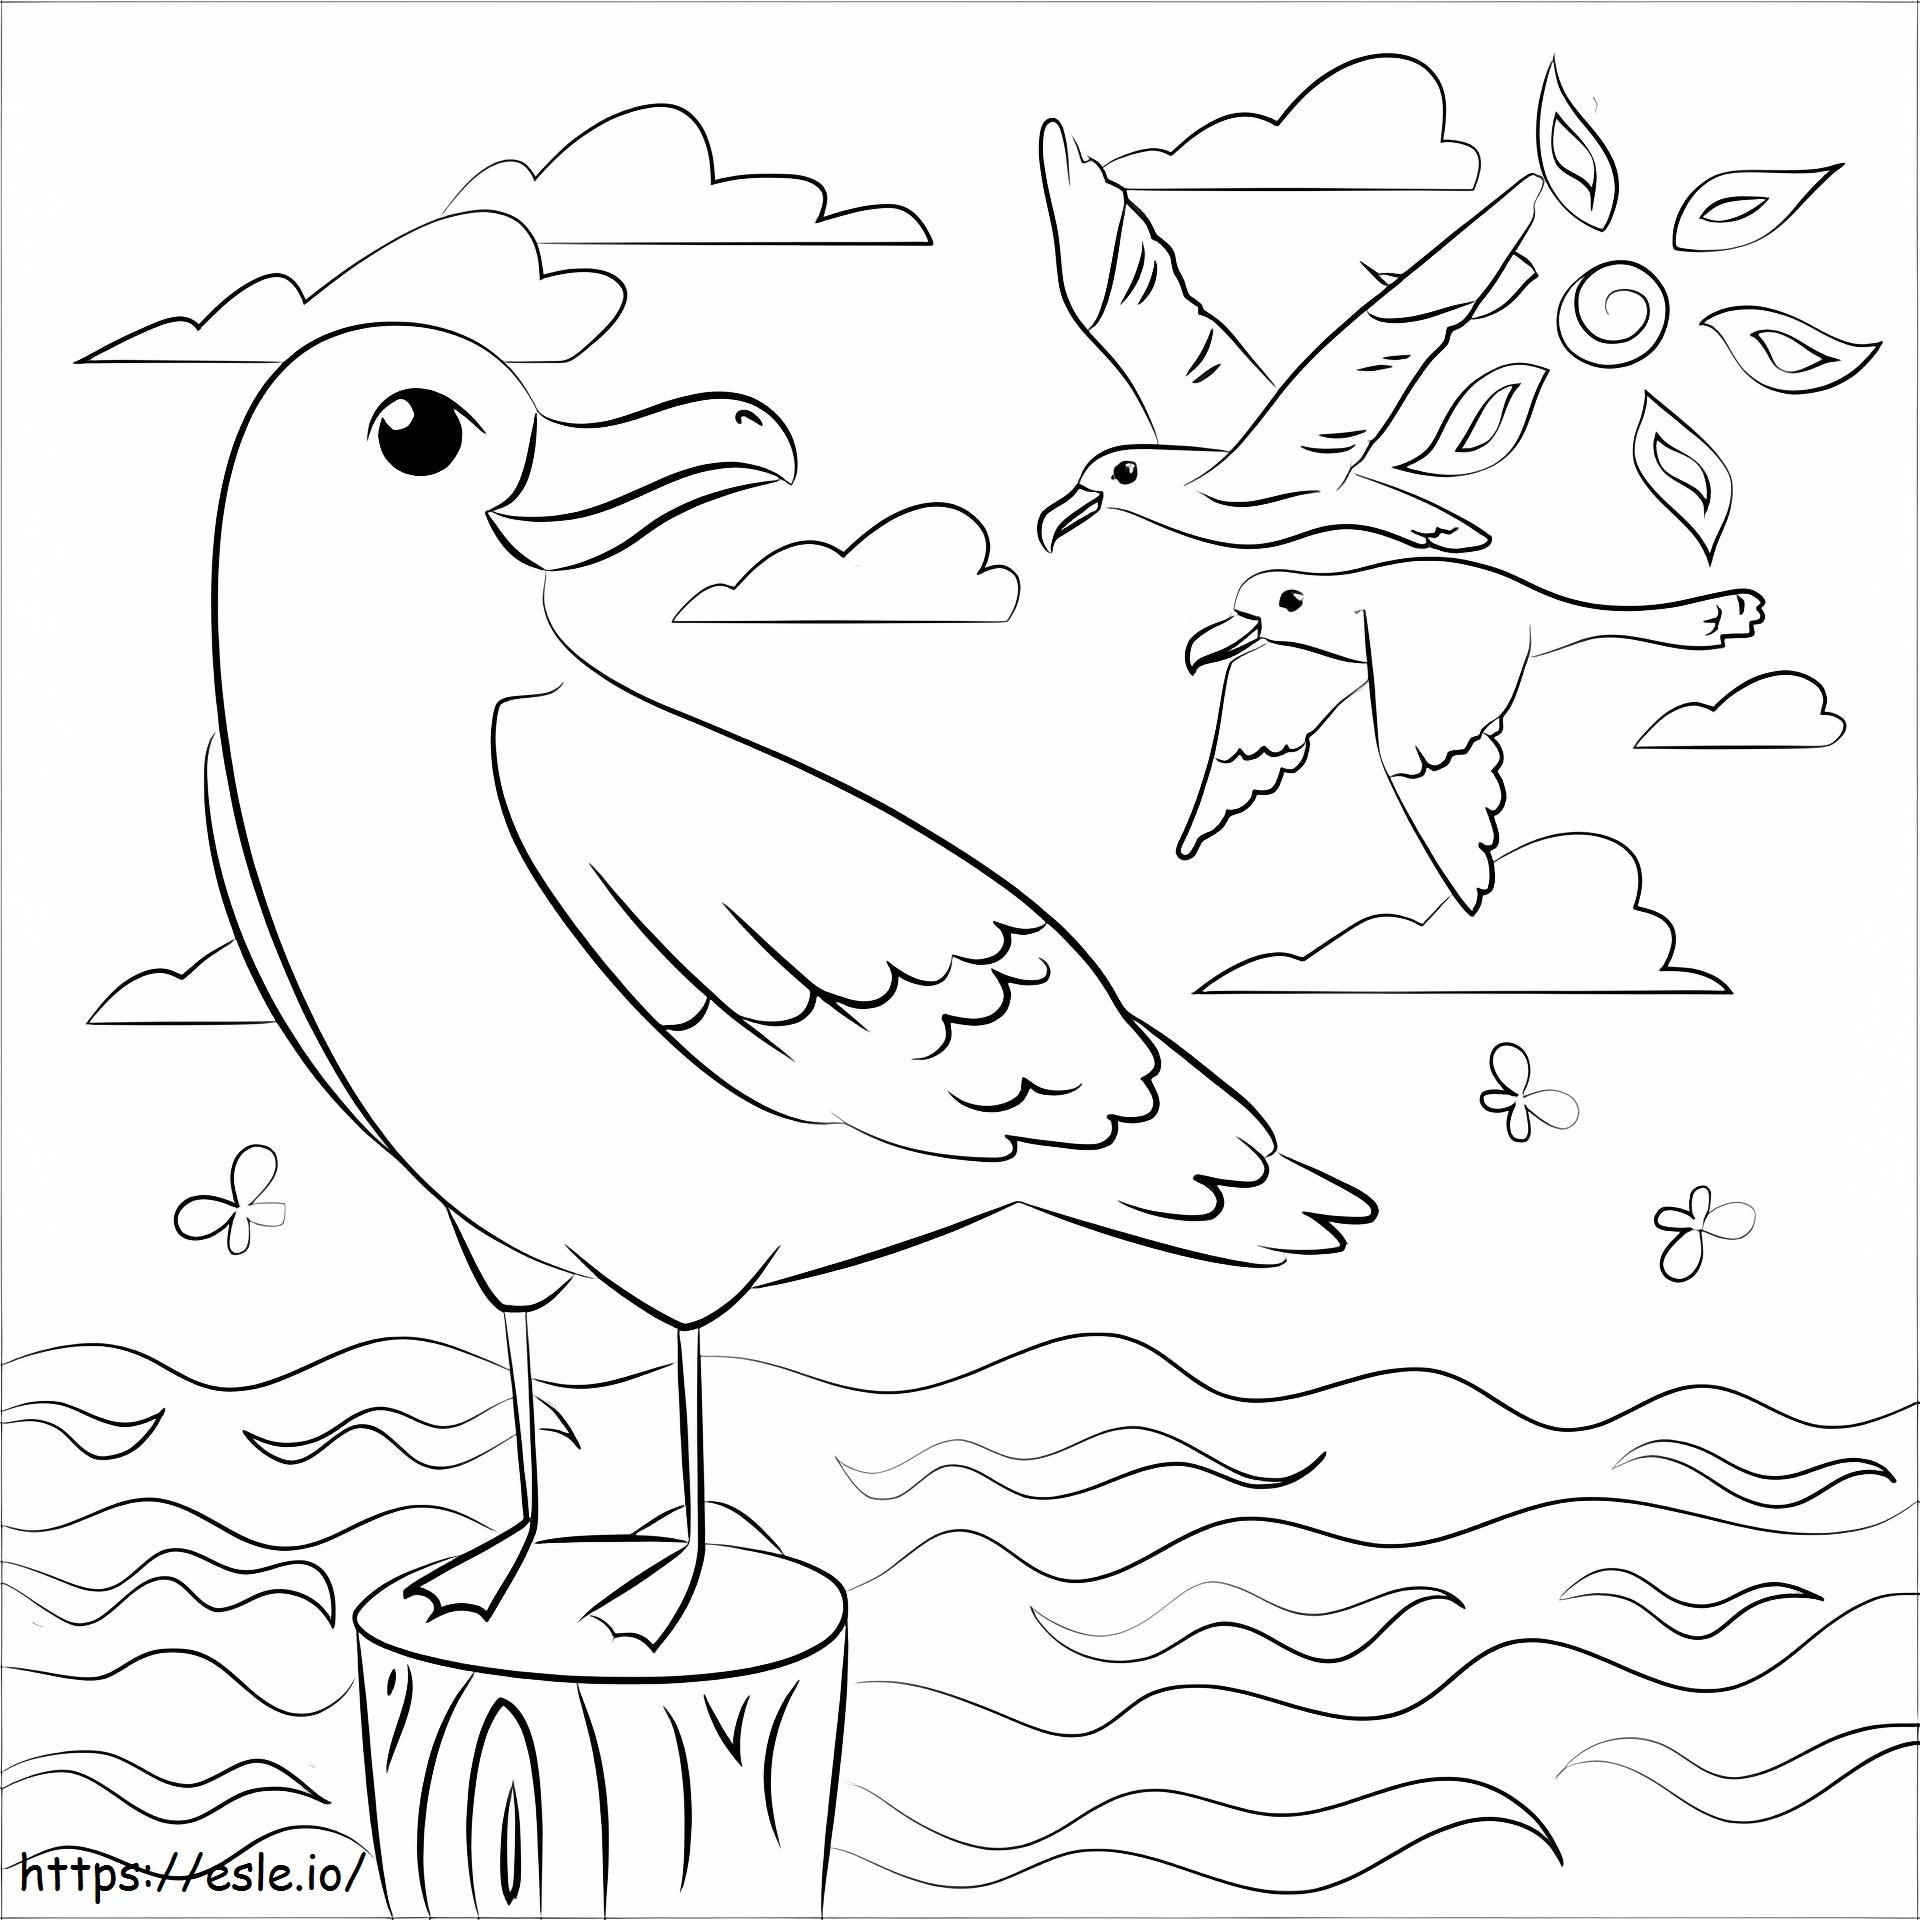 Three Seagulls coloring page